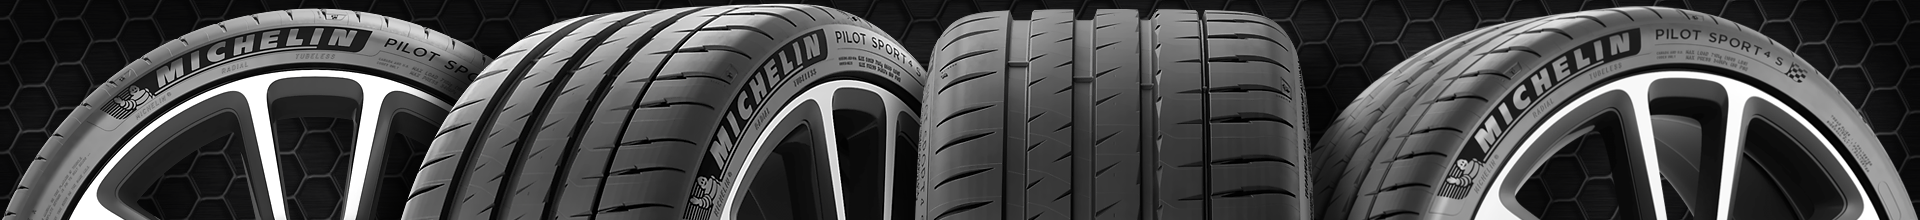 265 50 19 discount tires from Tire Outlet US